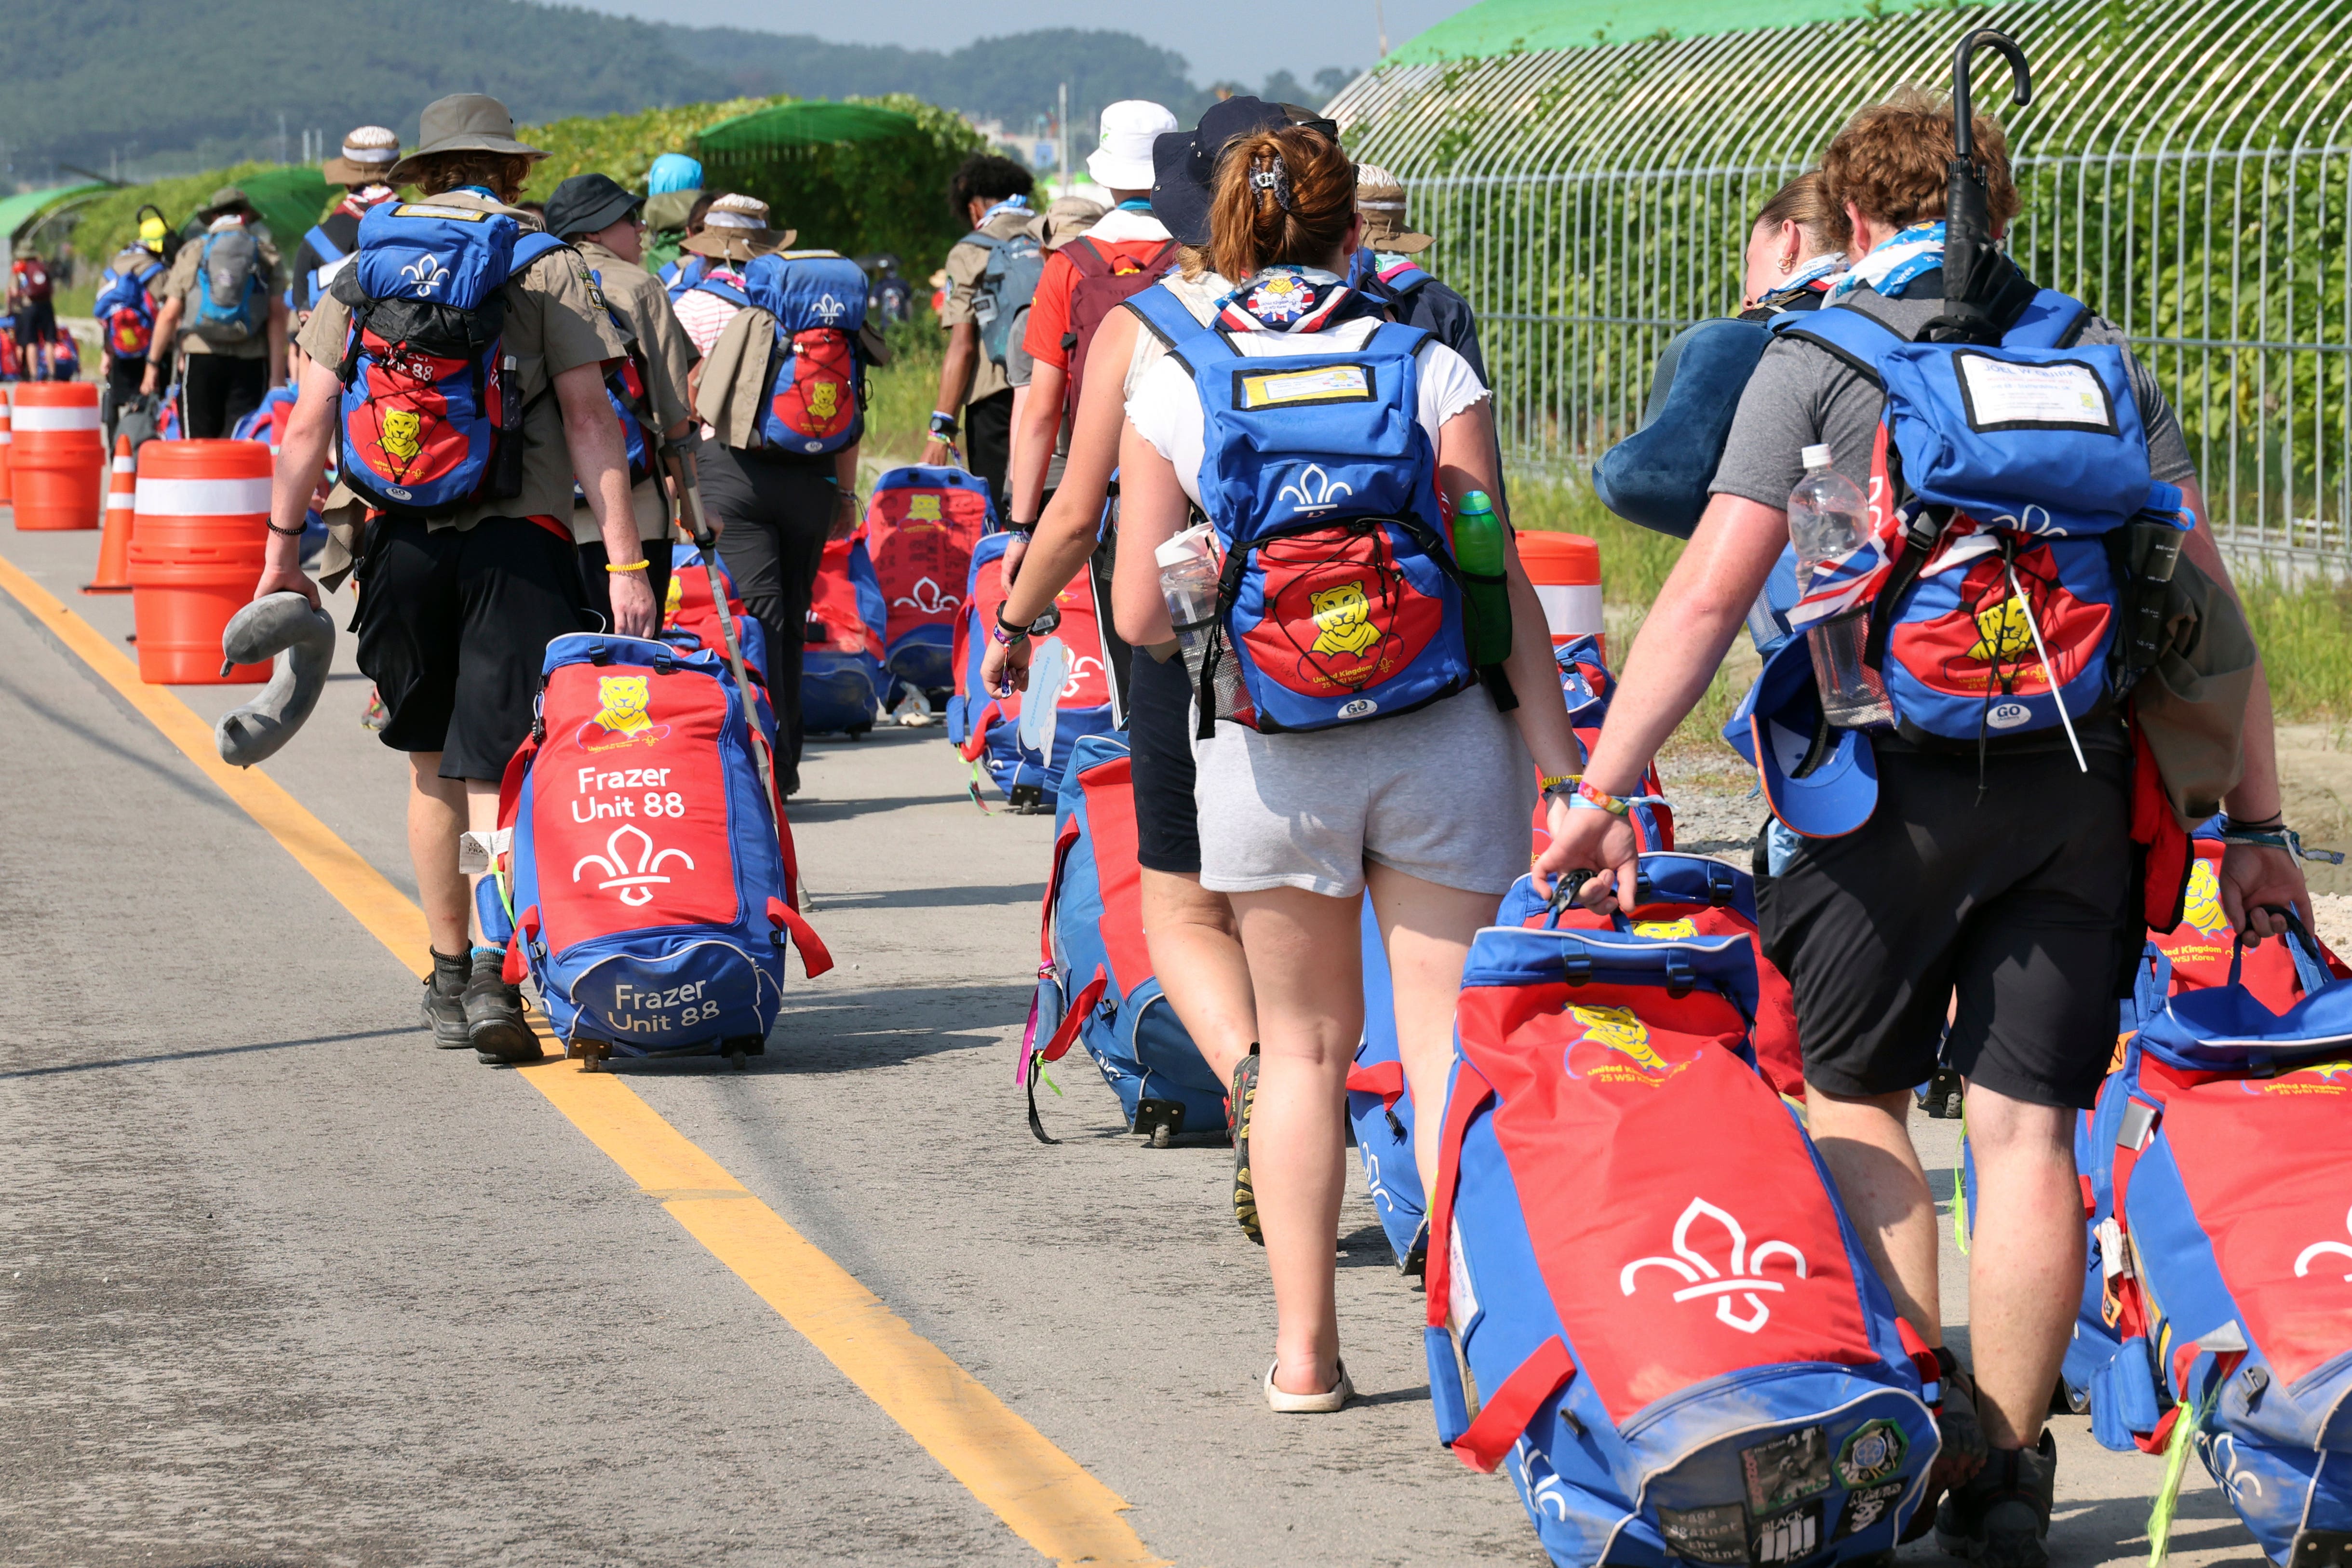 British Scouts were the first, and largest, group to leave the World Scout Jamboree campsite